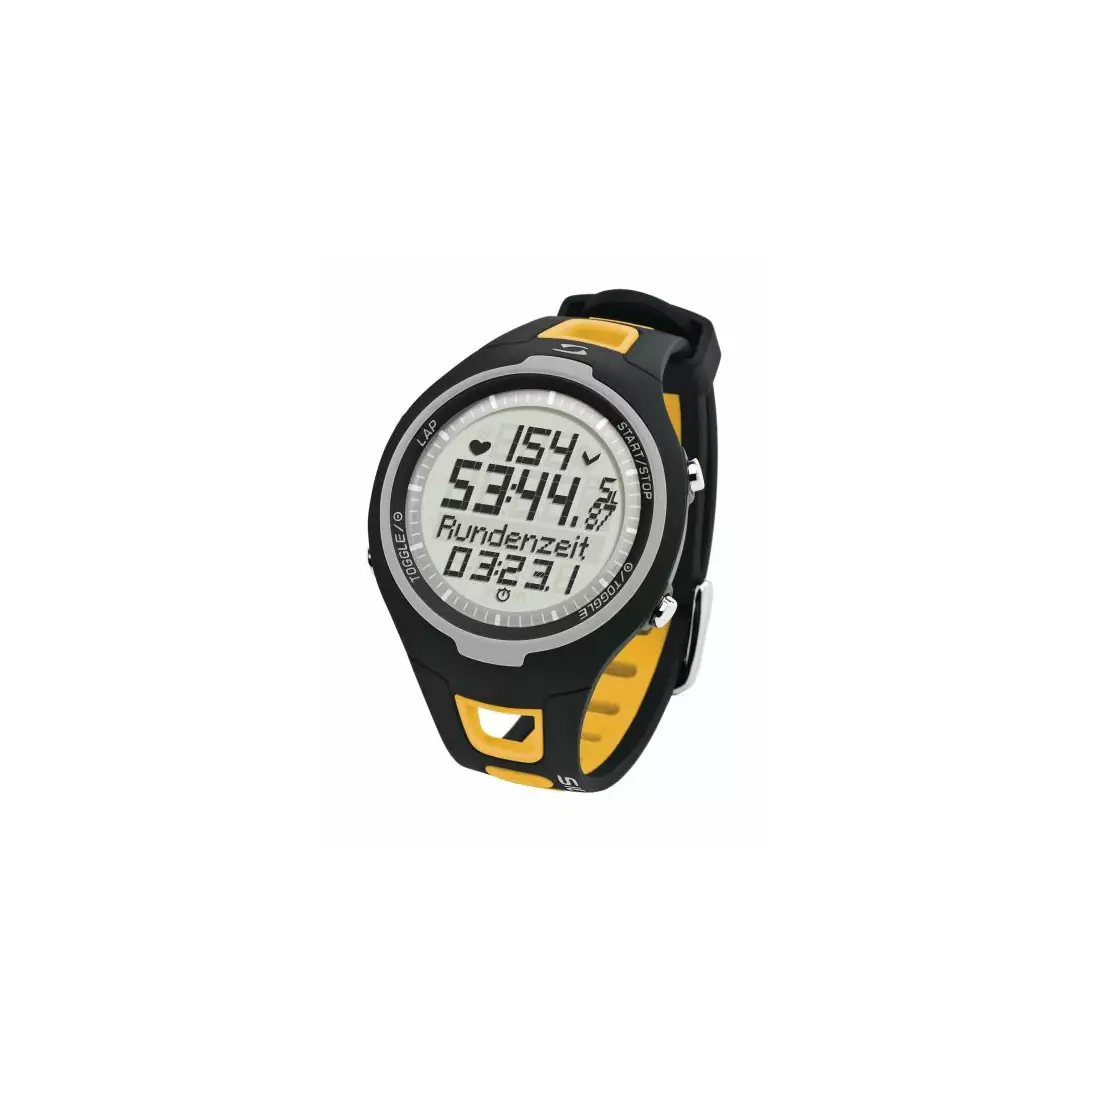 SIGMA SPORT PC 15.11 heart rate monitor - color: Yellow